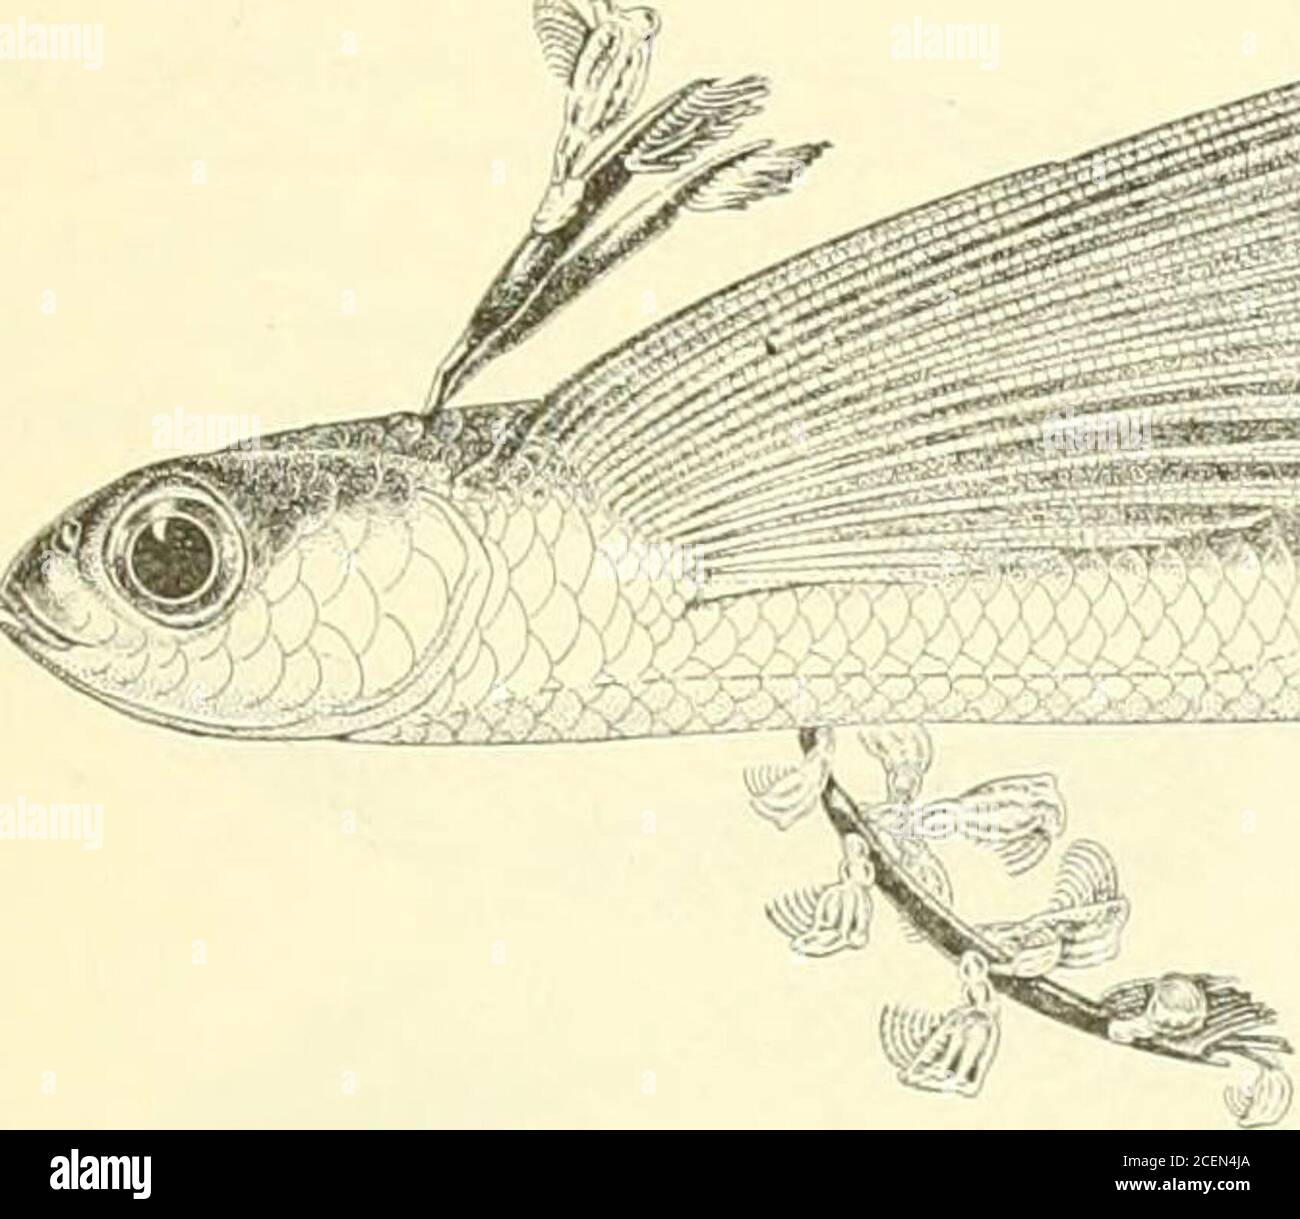 . Bulletin of the Bureau of Fisheries. r in life, pale olivaceous; a silvery streak along side; fins dirty-yellowish olive. Fourteen specimens from Vaisigano River, at Aj)ia. The type is no. 51718, U. S. National Museum,length 6 inches. EVOLANTIA Snodgrass & Heller. 258. Evolantia microptera (Cuvier & Valenciennes). Hawaii: New Ireland; East Indies; Gala- pagos Is. FAREXOCCETUS Bleaker. 259. Parexoccetus brachypterus (Solanderi. Tahiti; Hawaii; Laysan; West Indies. 260. Parexoccetus brevipinuis (Cuvier & Valenciennes). New Ireland. , 261. Parexoccetus rostratus ((iimther). Hawaii. EXOCffiTUS L Stock Photo